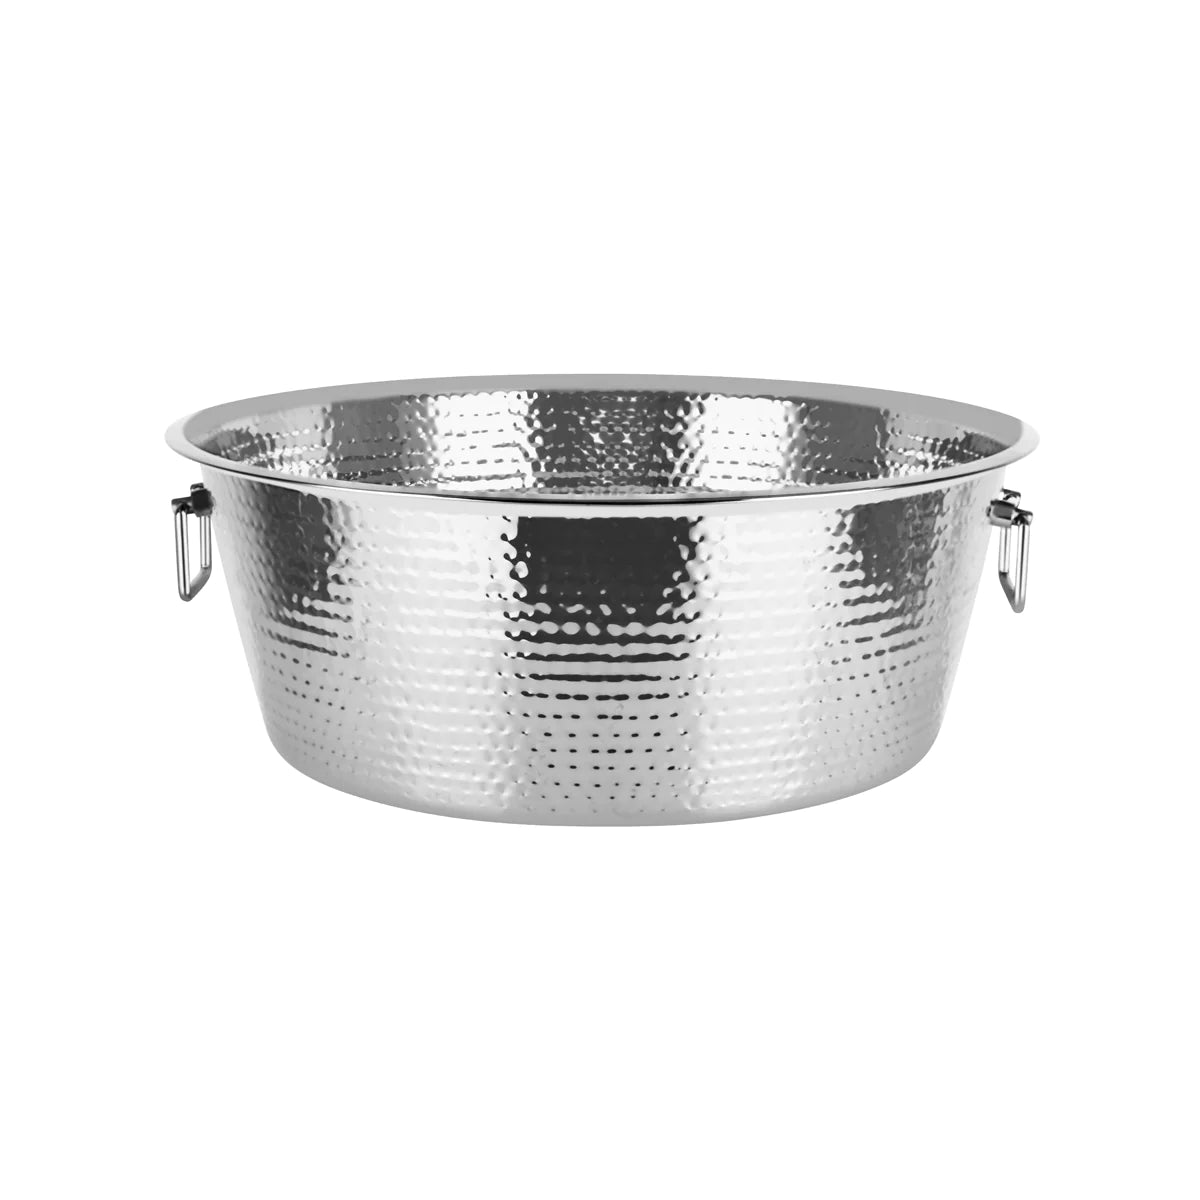 HAMMERED CHAMPAGNE PARTY TUB 530x245mm